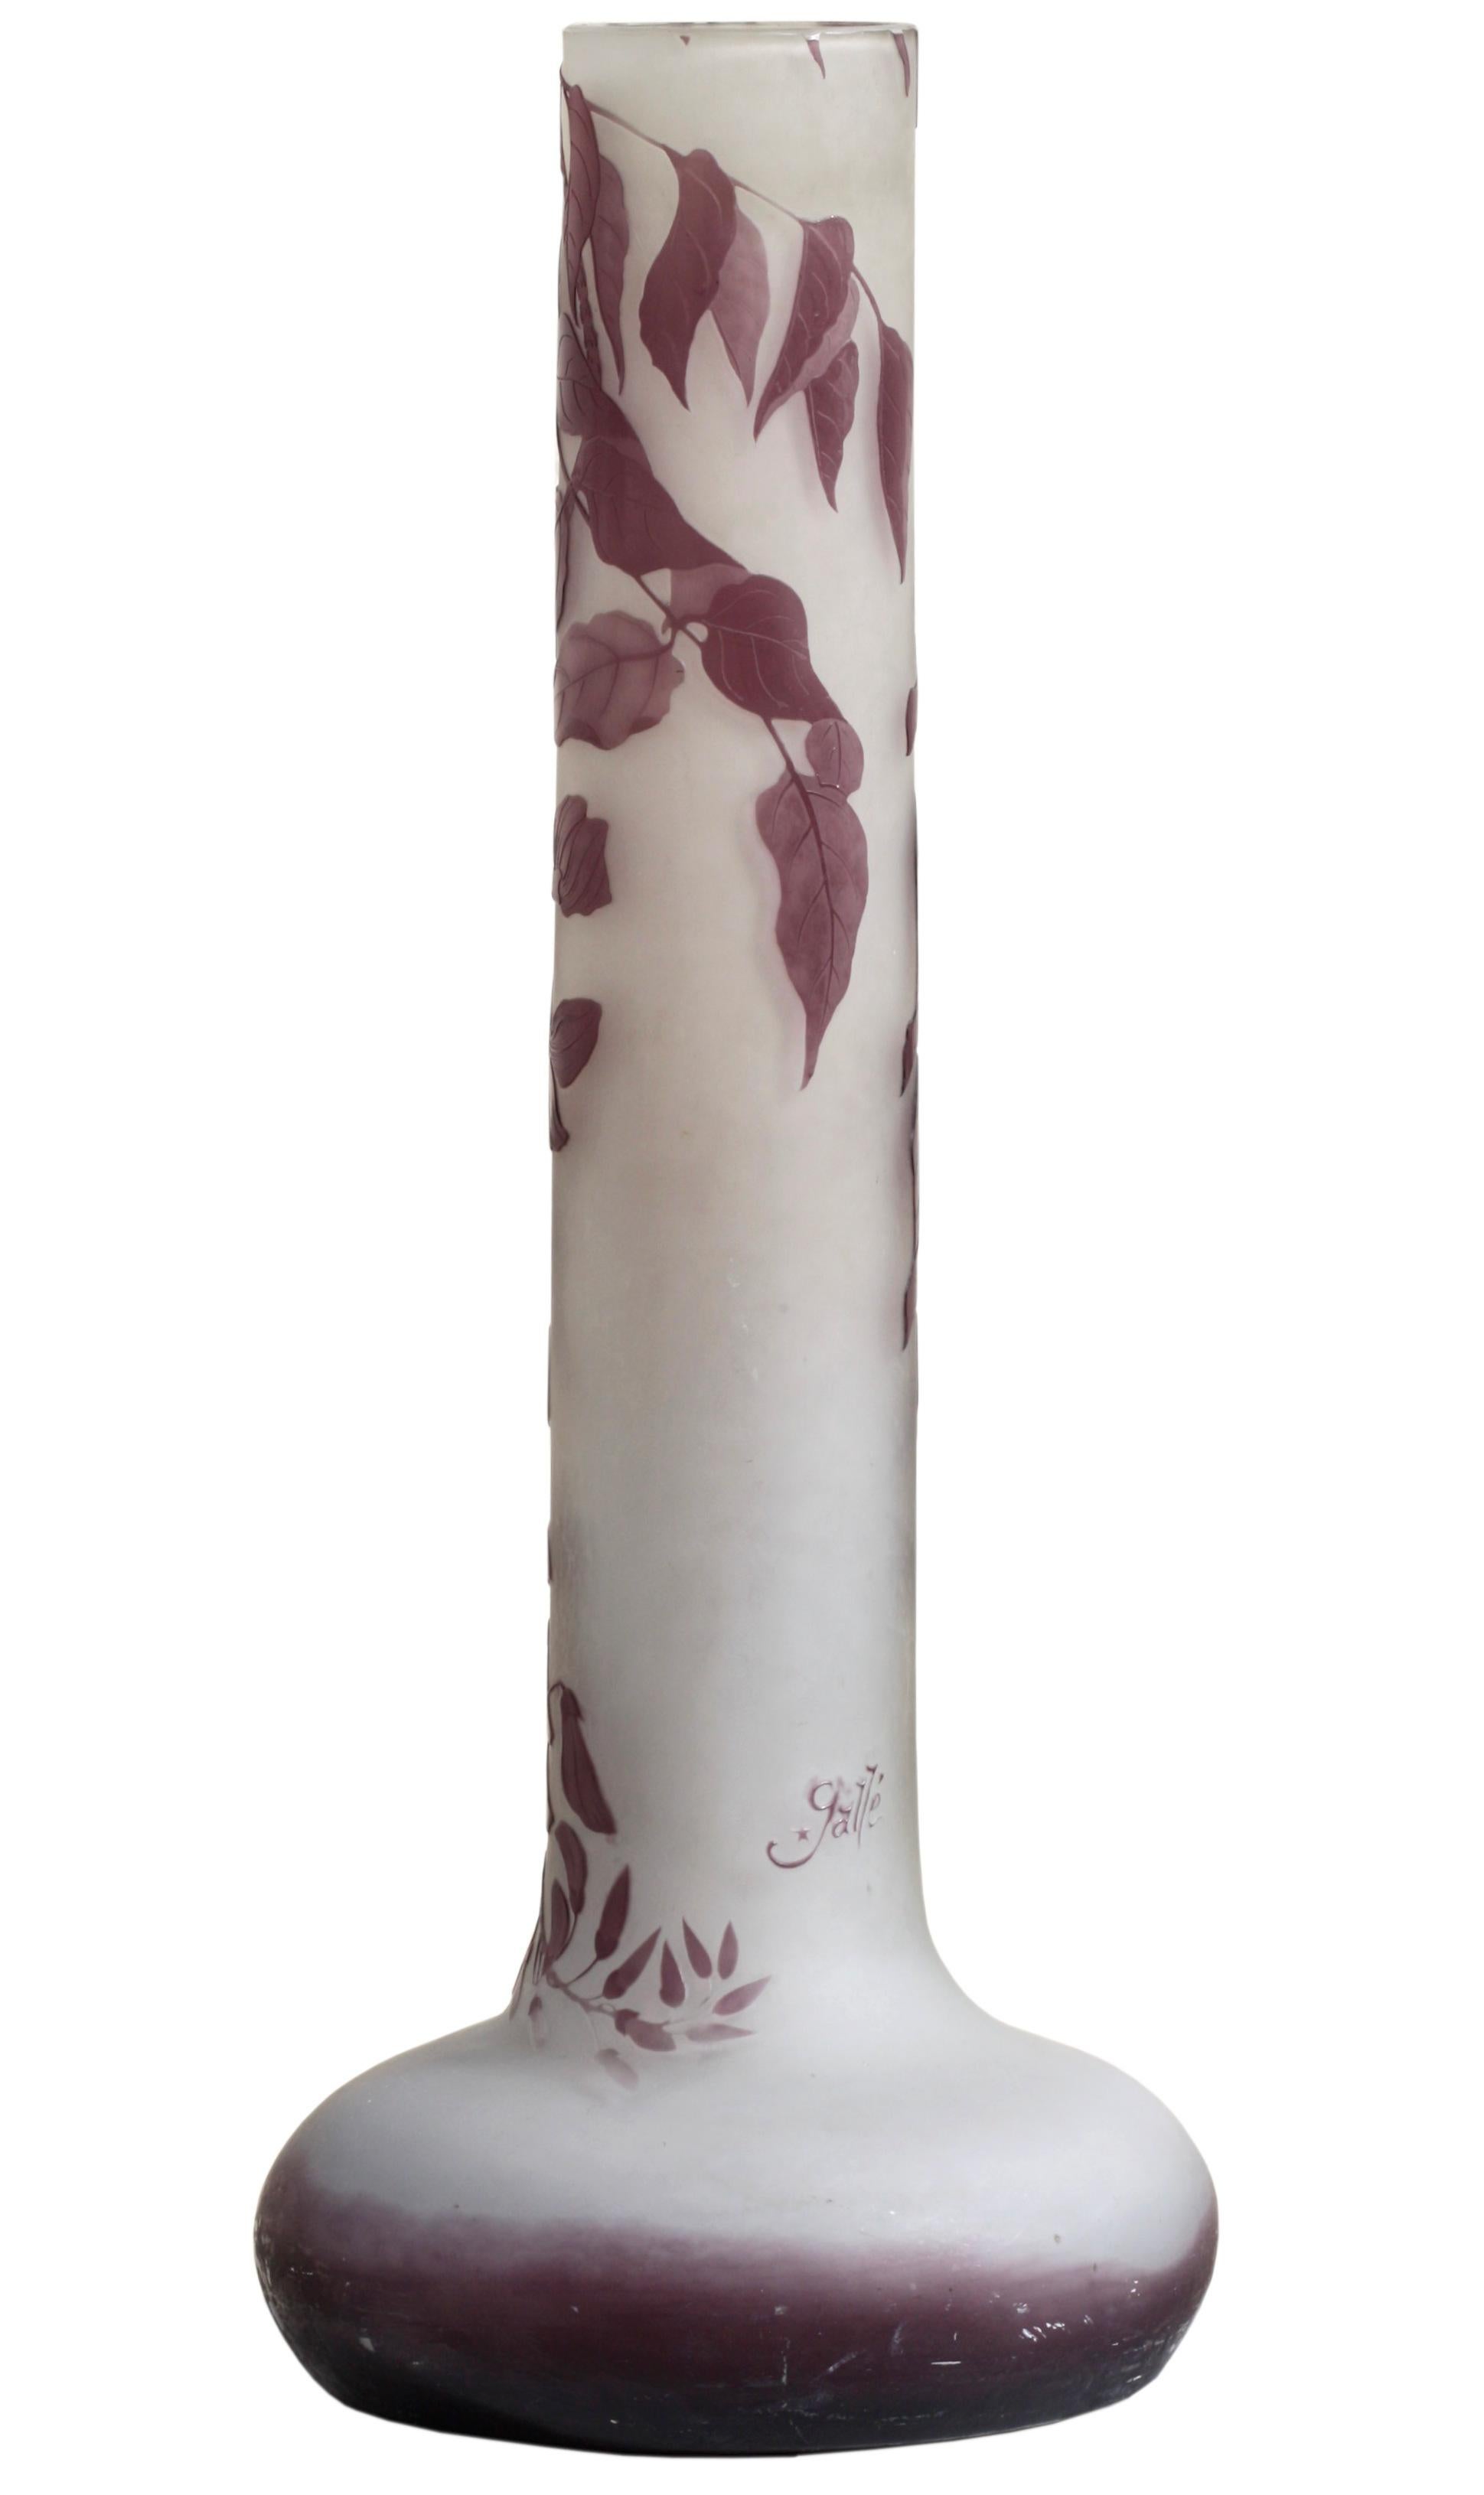 EMILE GALLE, FRENCH
A massive Cameo Glass Vase, circa 1905
'Wisteria'
23.75 in. (60.9 cm.) high
signed in cameo (with a star) Galle
Provenance
Sotheby's
December 18, 2003
Emile Galle was a master craftsman who skillfully interpreted the